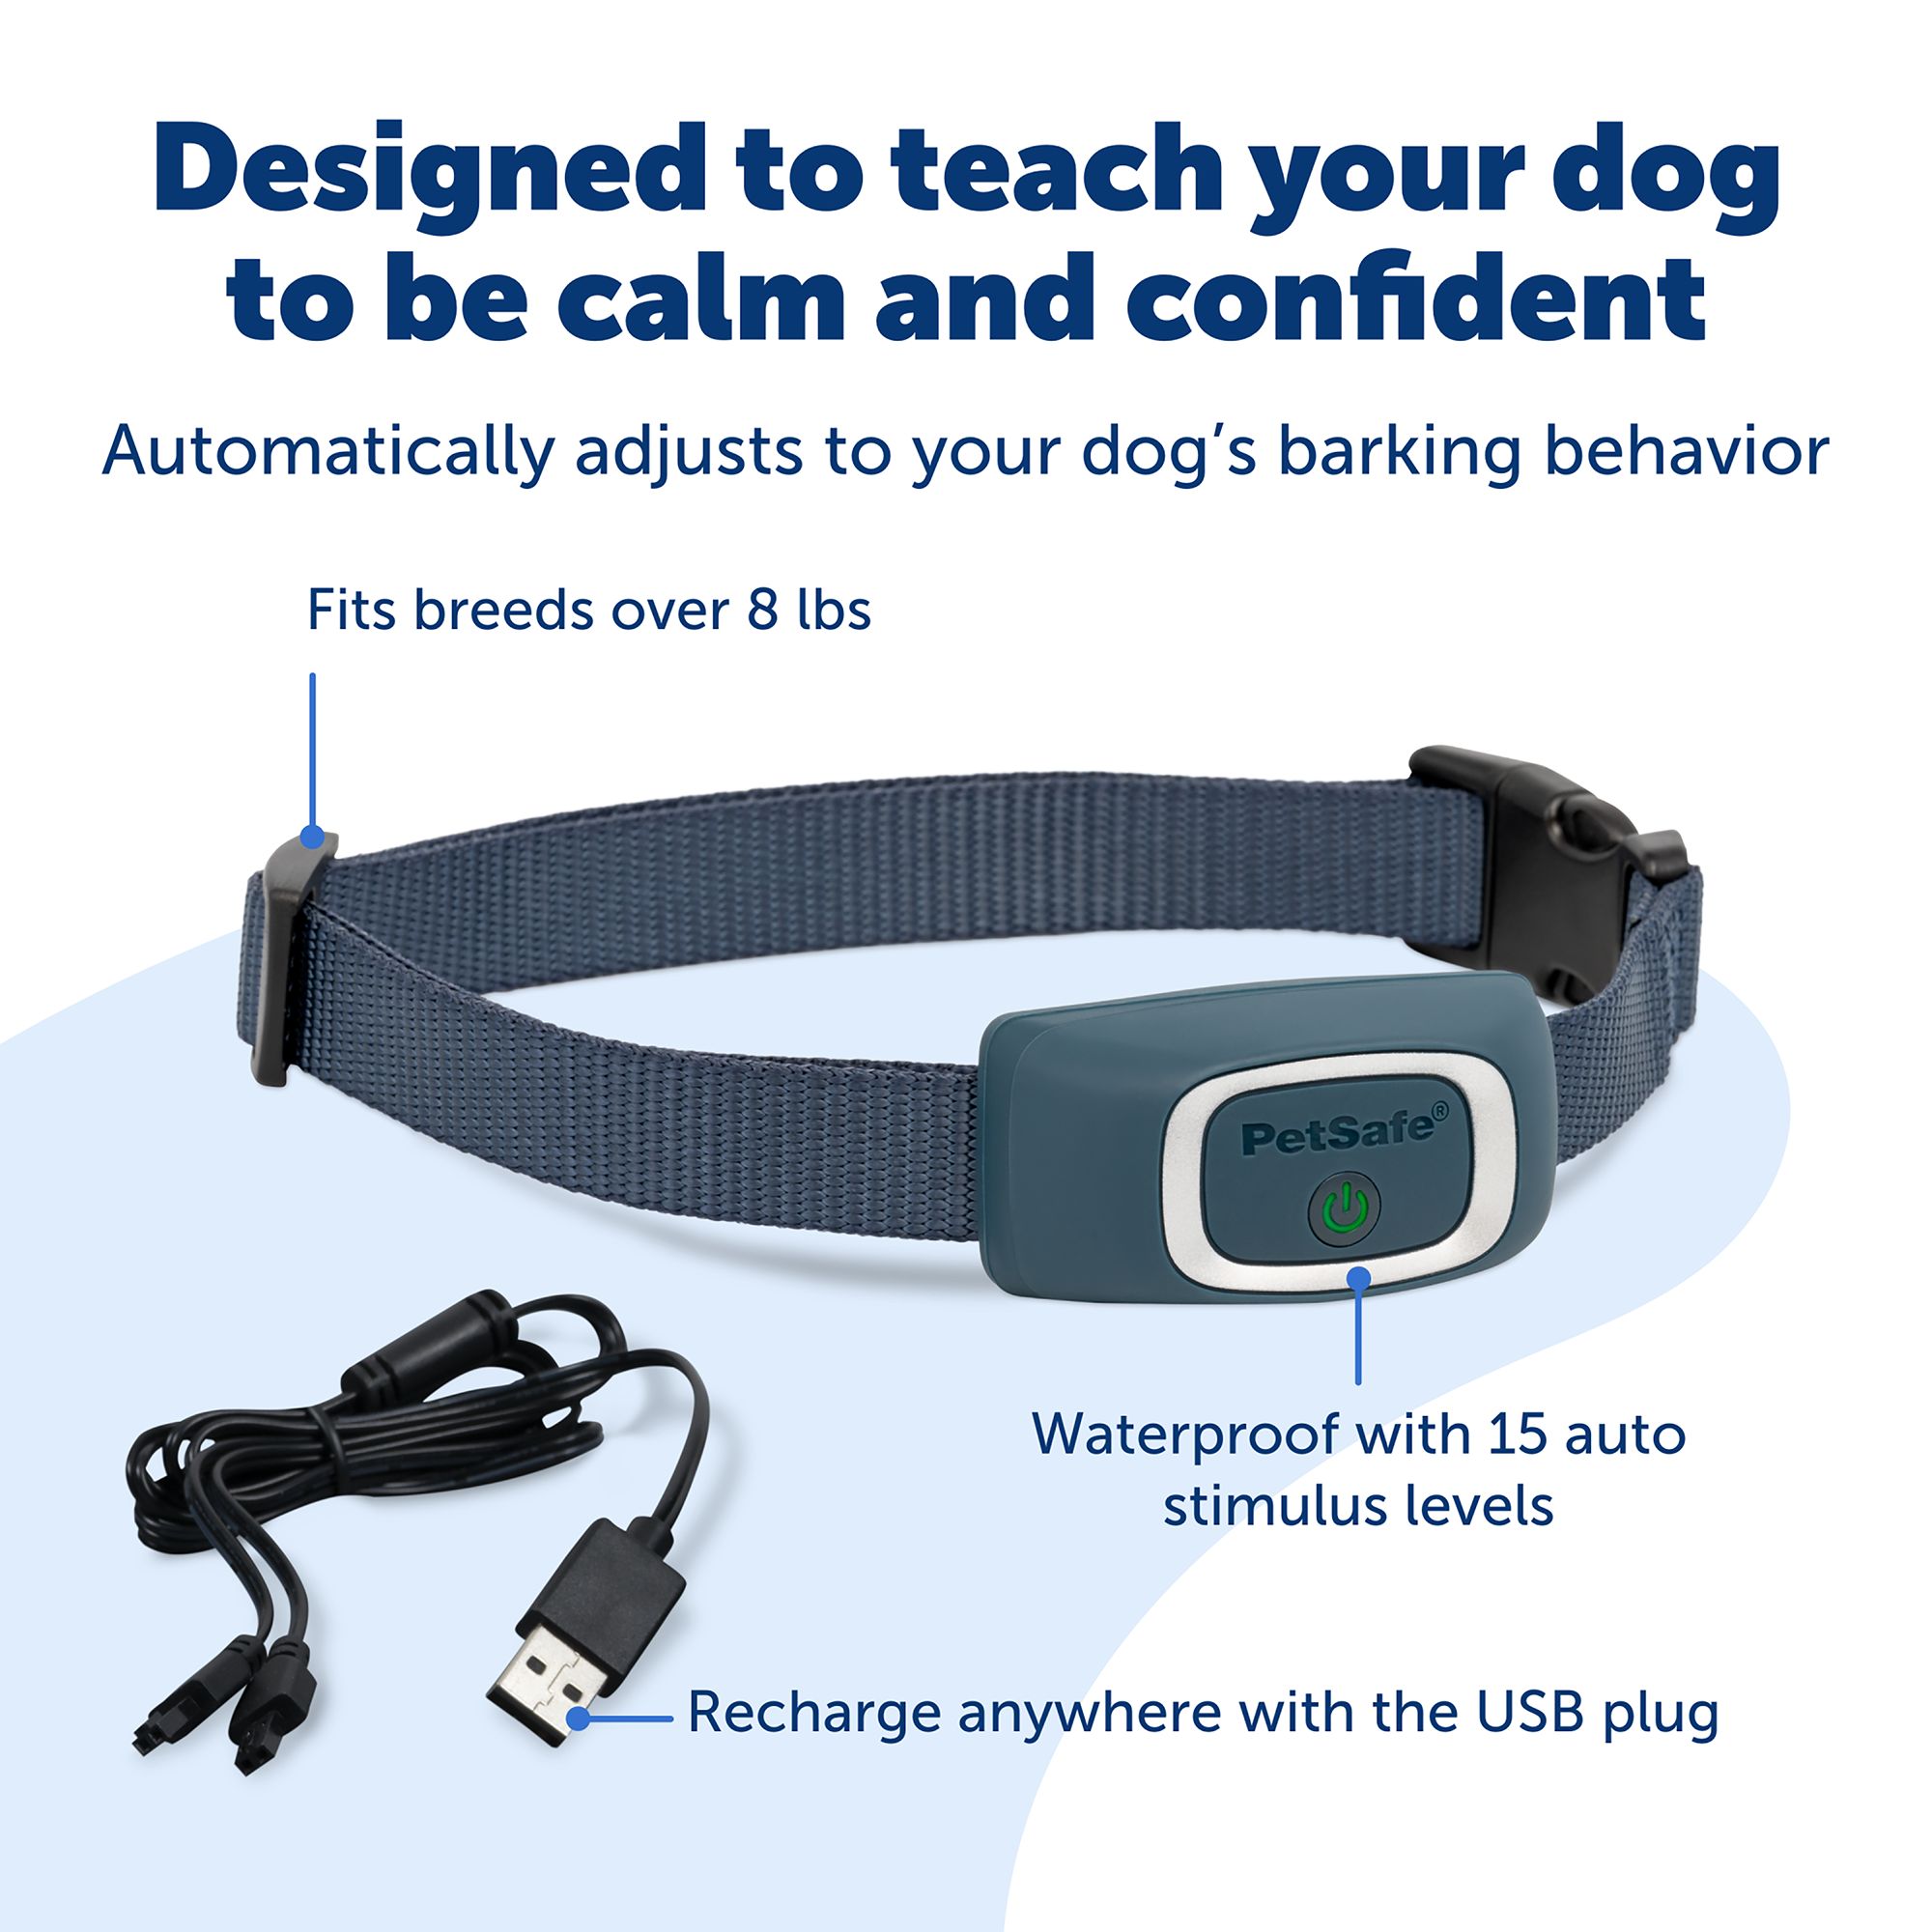 petsafe rechargeable collar not working